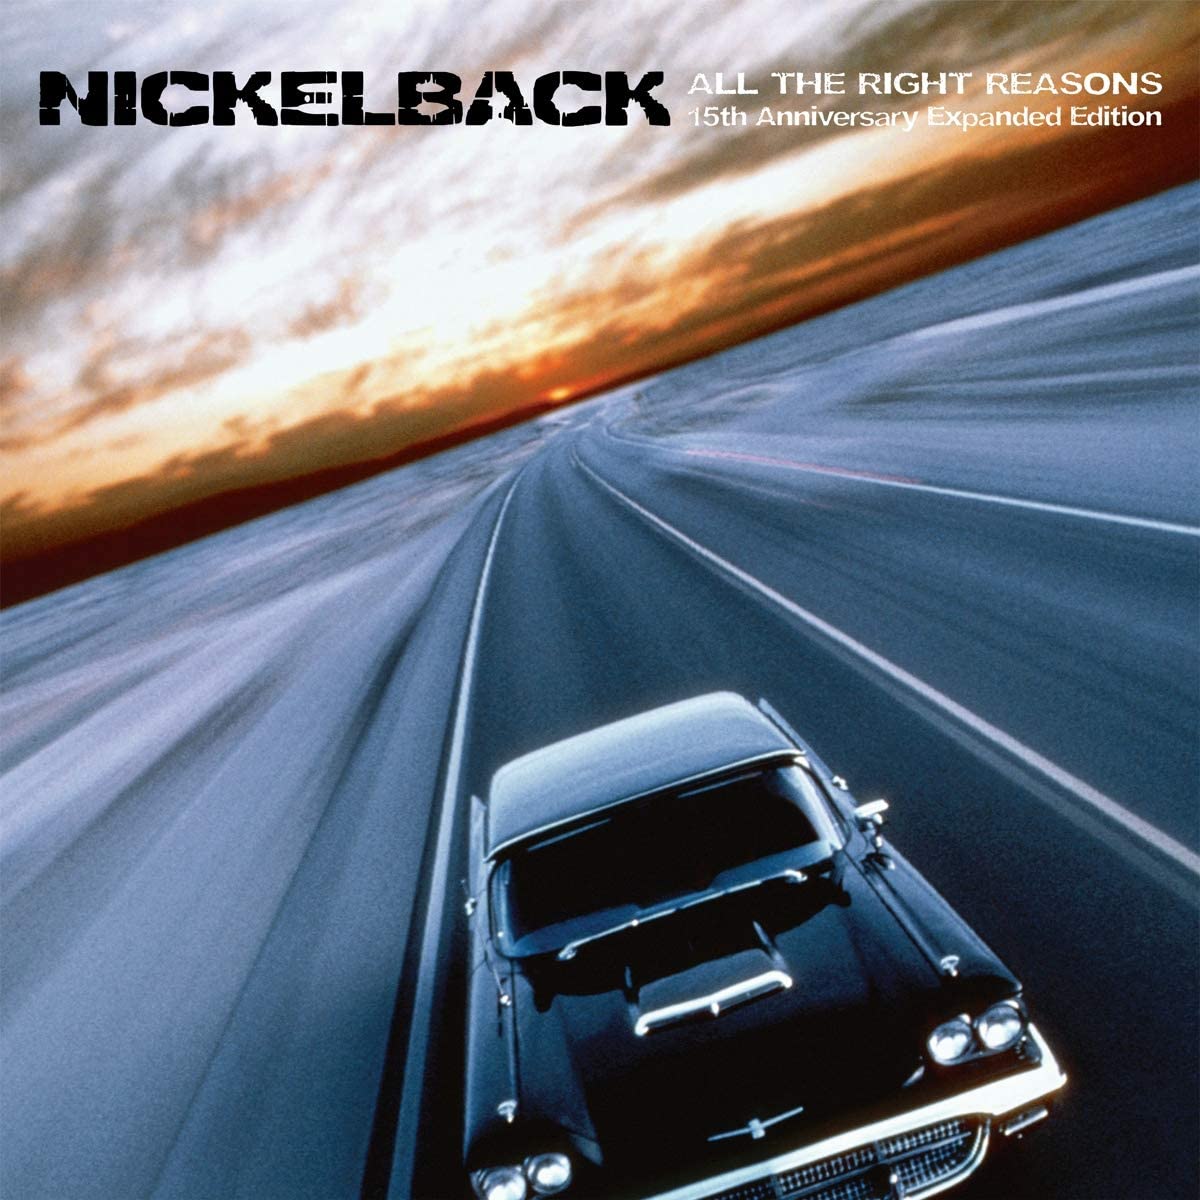 Nickelback - All The Right Reasons (15th Anniversary Expanded Edition) (2020) [FLAC 24bit/44,1kHz]